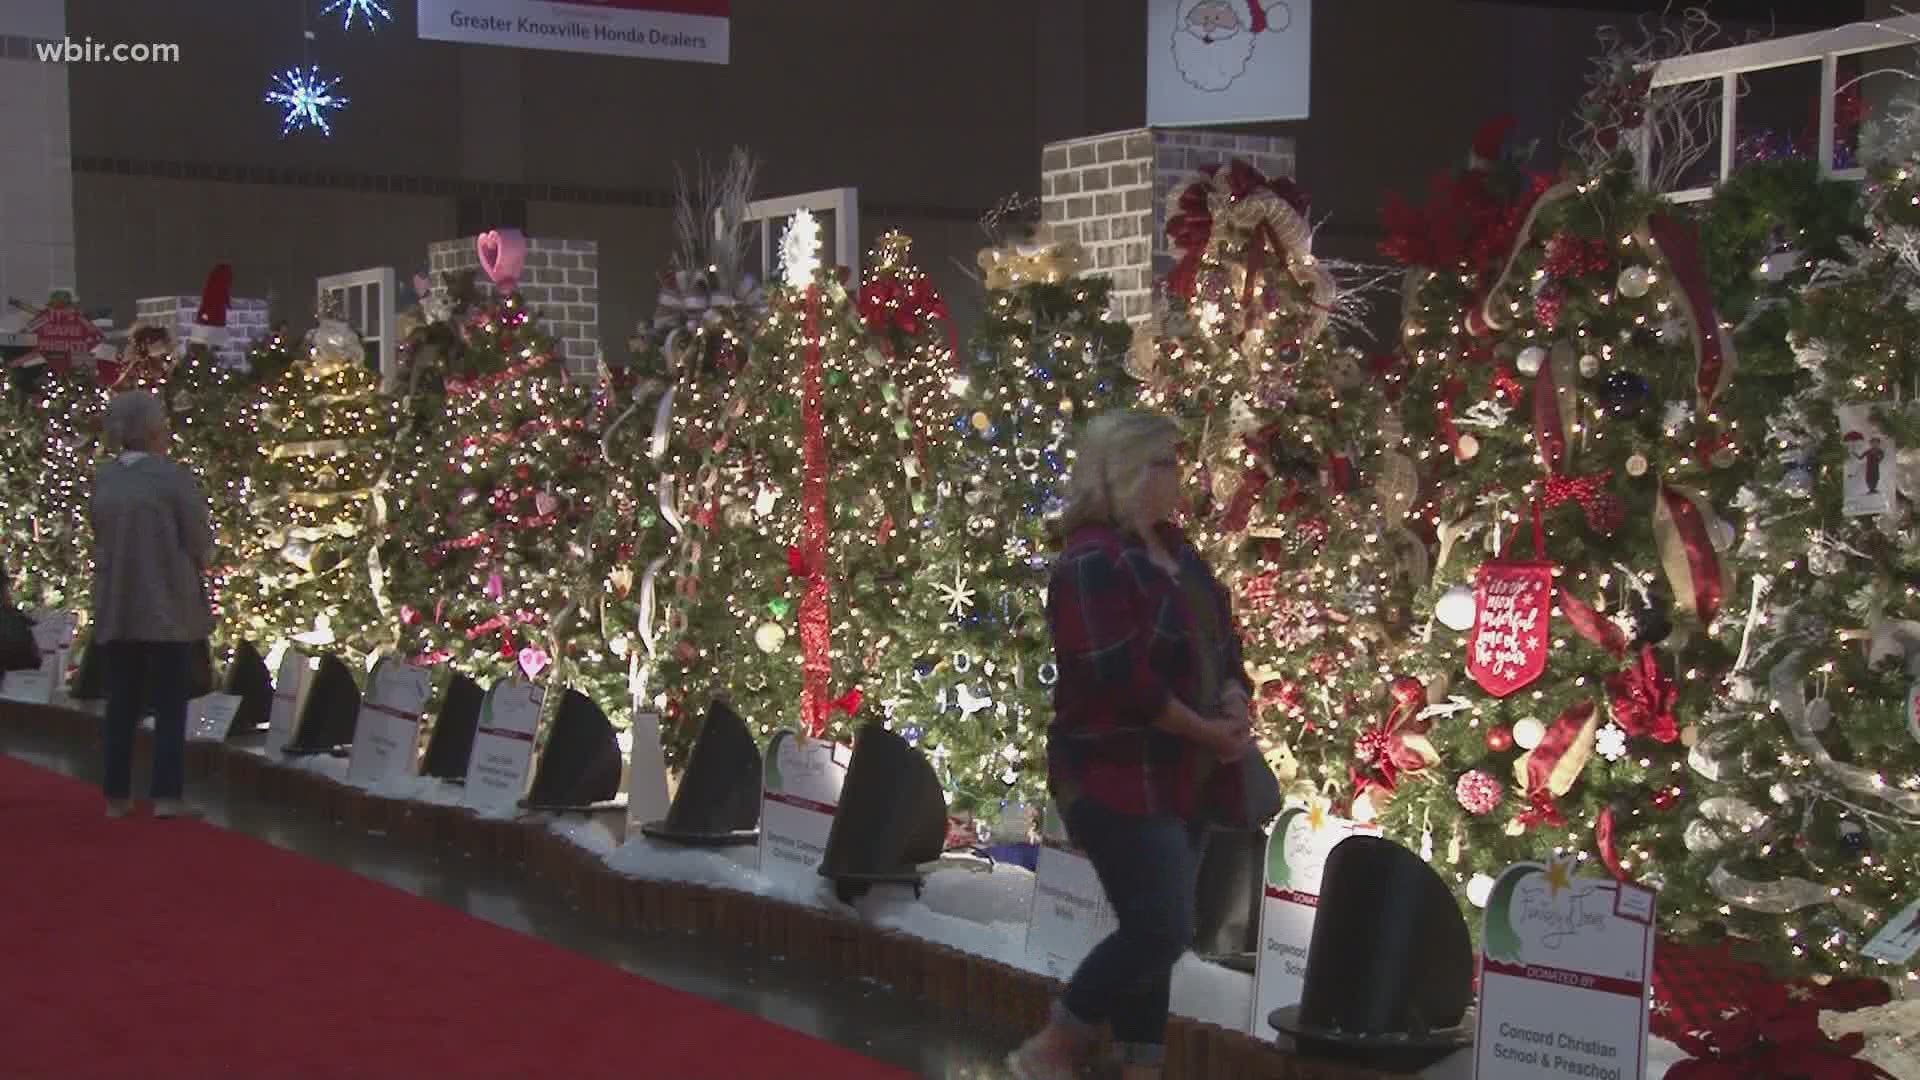 People across our area say they're sad to hear "Fantasy of Trees" is canceled this winter.